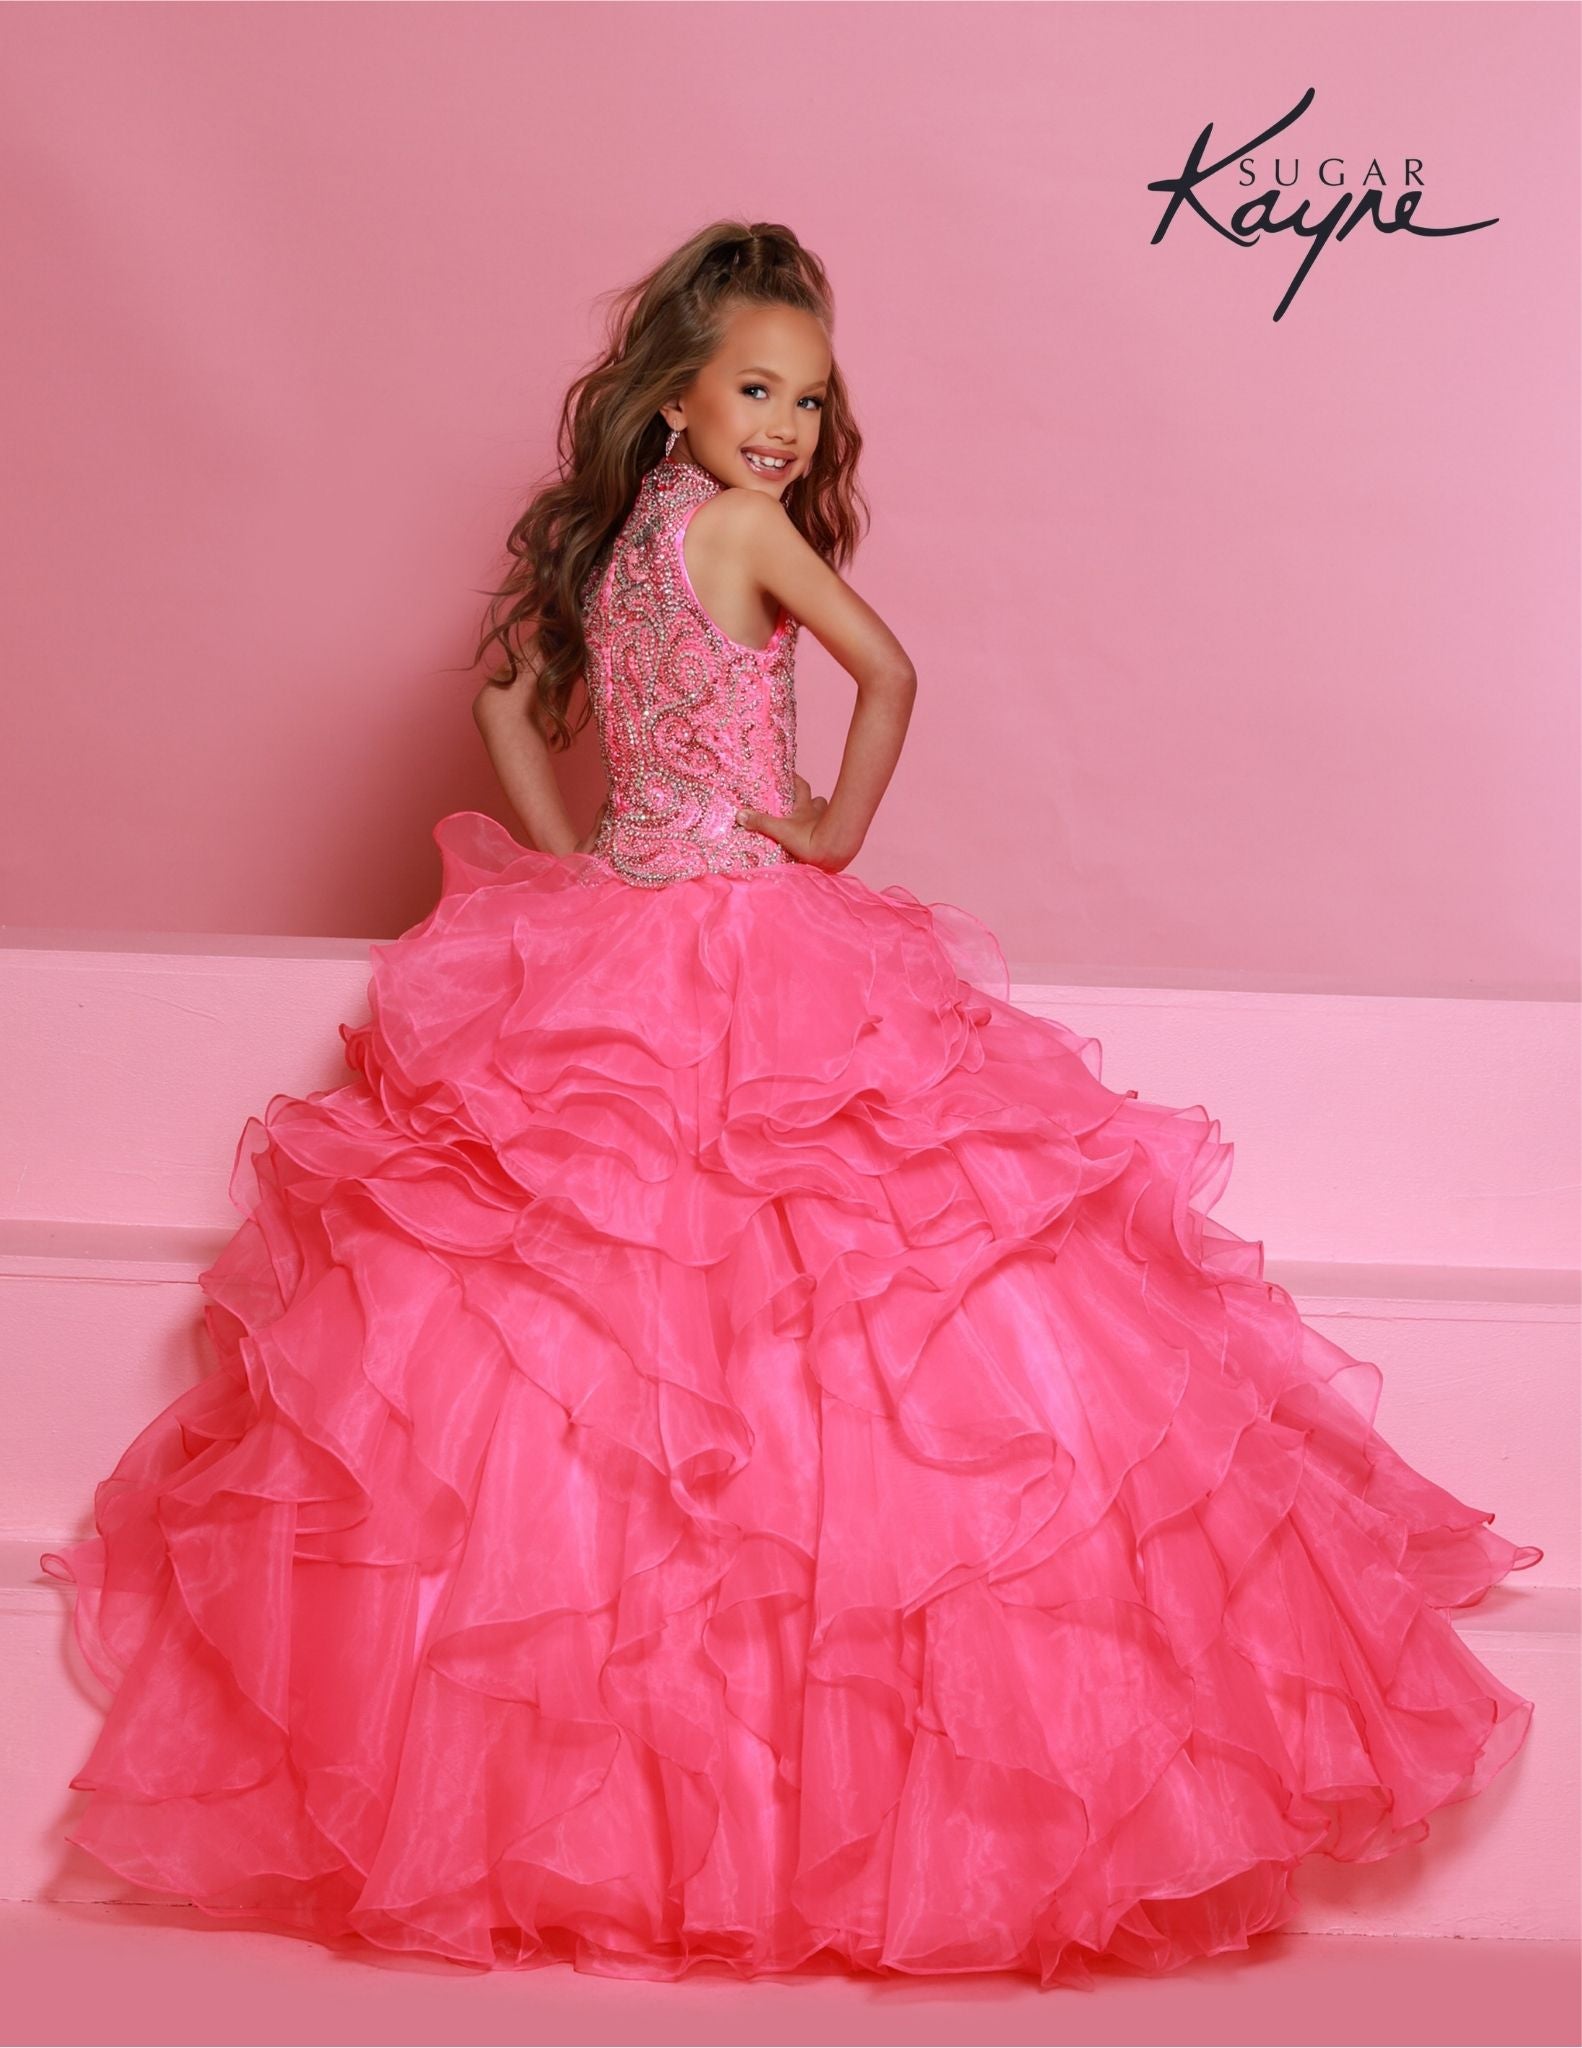 Sugar Kayne C326 Barbie Pink is the perfect pageant dress for young girls and preteens, featuring a ruffled long skirt, high neckline, and crystal bodice with sleeveless design.